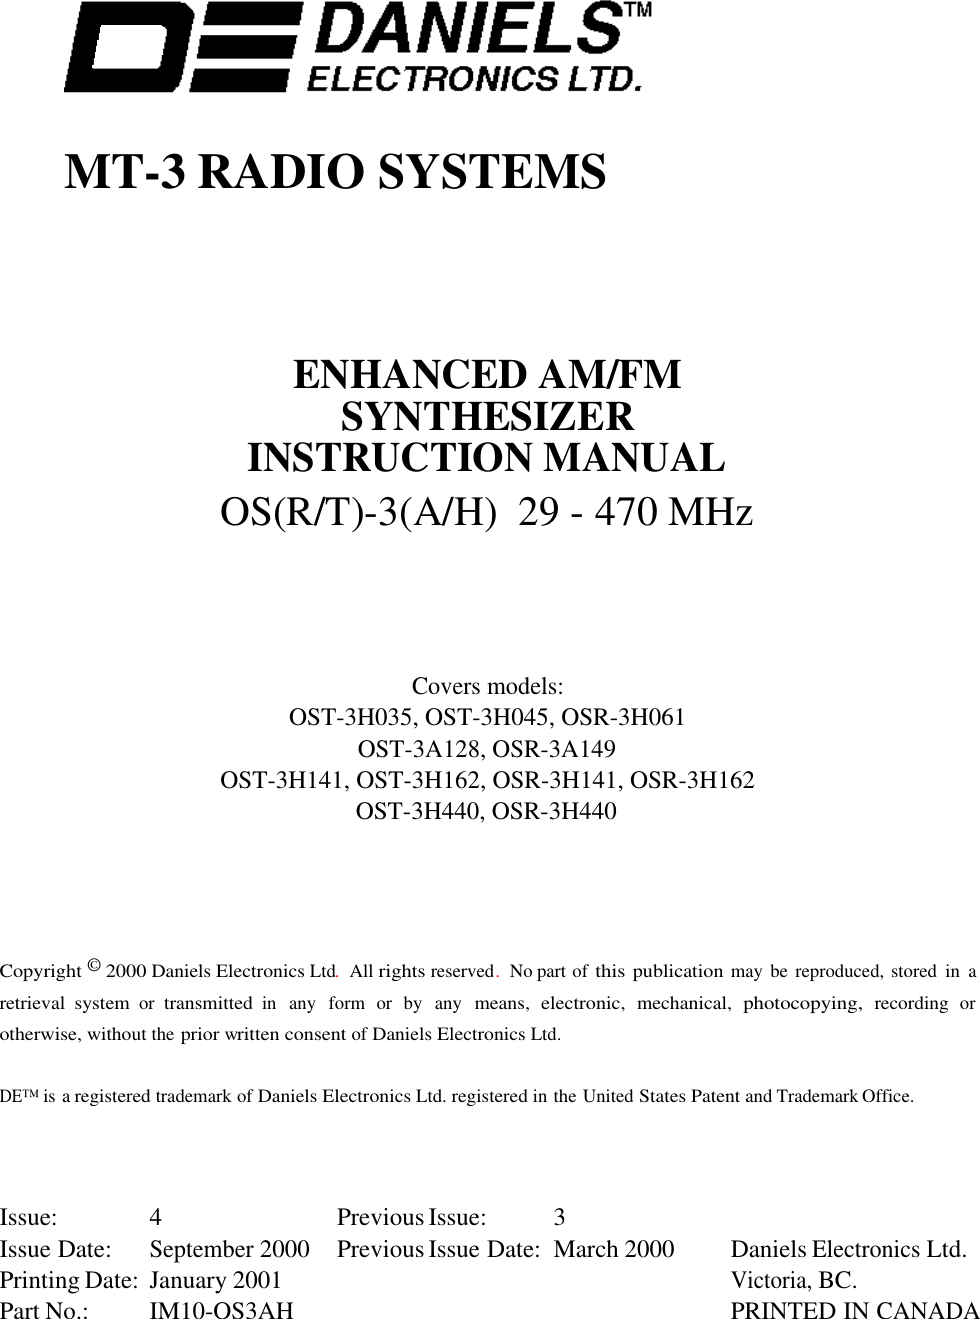 MT-3 RADIO SYSTEMSENHANCED AM/FMSYNTHESIZERINSTRUCTION MANUALOS(R/T)-3(A/H)  29 - 470 MHzCovers models:OST-3H035, OST-3H045, OSR-3H061OST-3A128, OSR-3A149OST-3H141, OST-3H162, OSR-3H141, OSR-3H162OST-3H440, OSR-3H440Copyright © 2000 Daniels Electronics Ltd.  All rights reserved.  No part of this publication may be reproduced, stored  in  aretrieval system or transmitted in  any  form  or  by  any means, electronic, mechanical, photocopying, recording orotherwise, without the prior written consent of Daniels Electronics Ltd.DE™ is a registered trademark of Daniels Electronics Ltd. registered in the United States Patent and Trademark Office.Issue: 4 Previous Issue:  3Issue Date:September 2000 Previous Issue Date: March 2000 Daniels Electronics Ltd.Printing Date: January 2001Victoria, BC.Part No.: IM10-OS3AH PRINTED IN CANADA